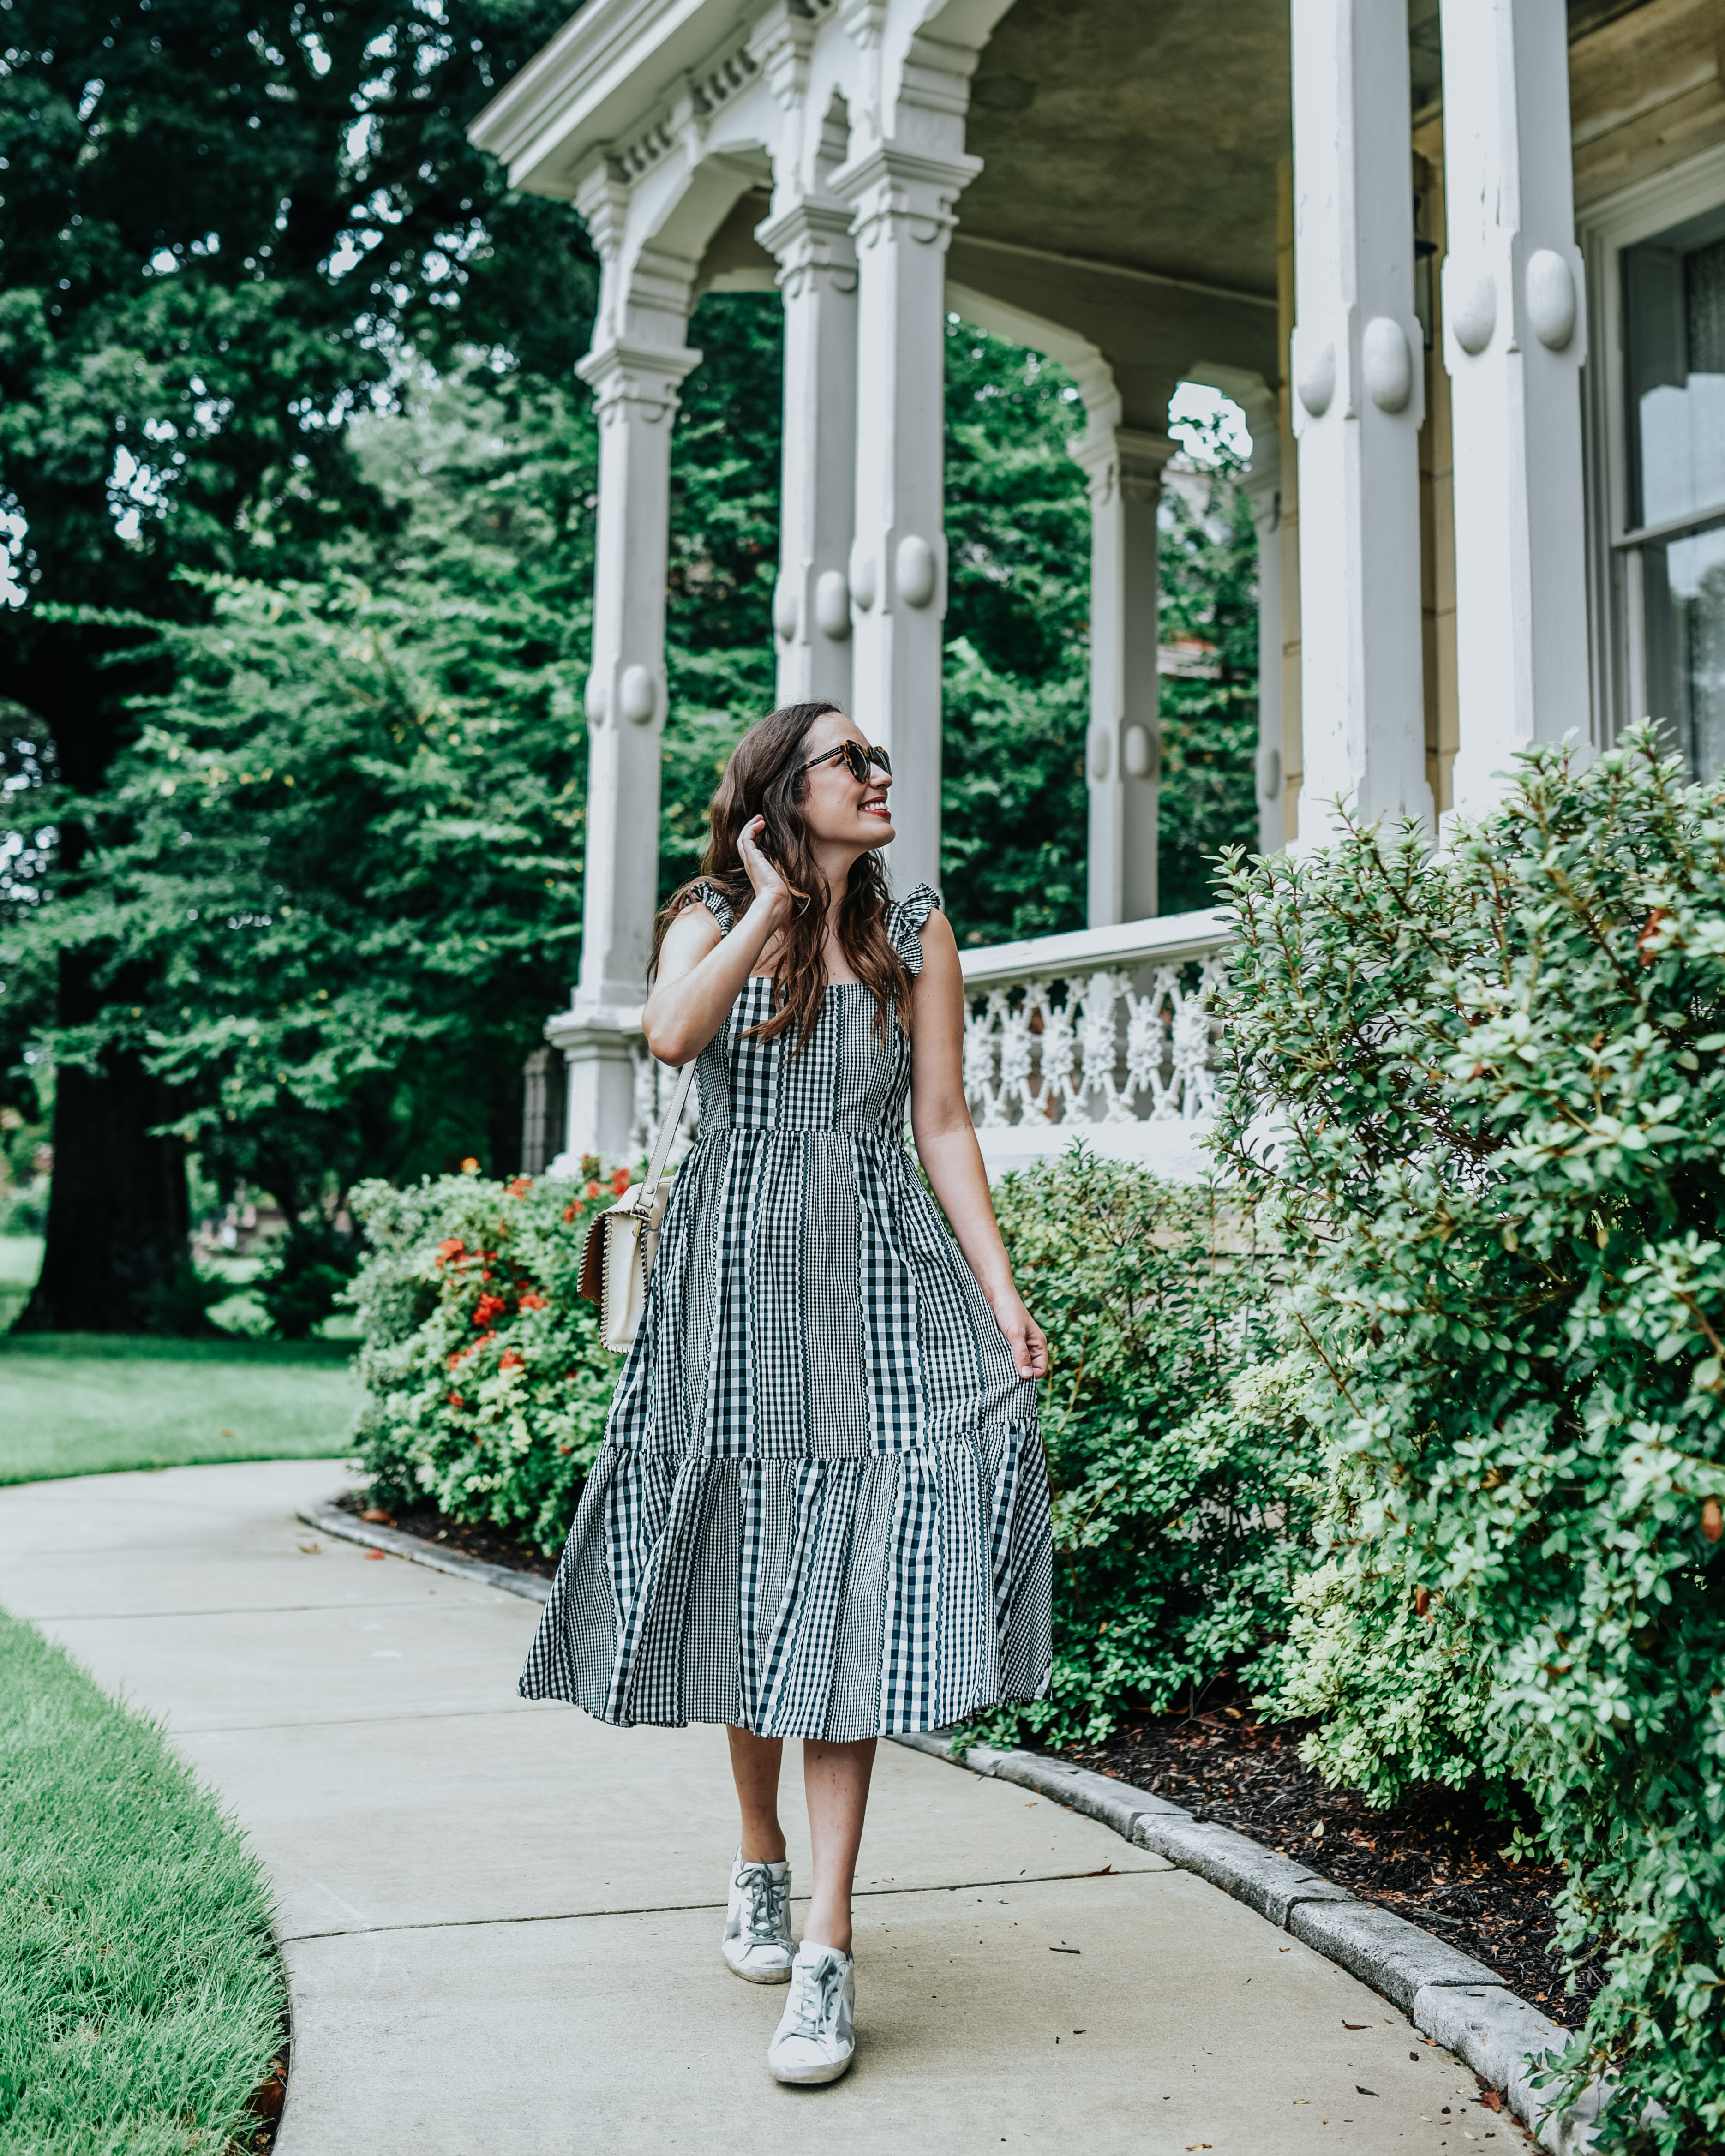 5 Dress Designers to Take Note Of this Summer by popular Memphis fashion blog, Lone Star Looking Glass: image of a woman standing outside by a historic building and wearing a black and white gingham Crosby by Mollie Burch dress.